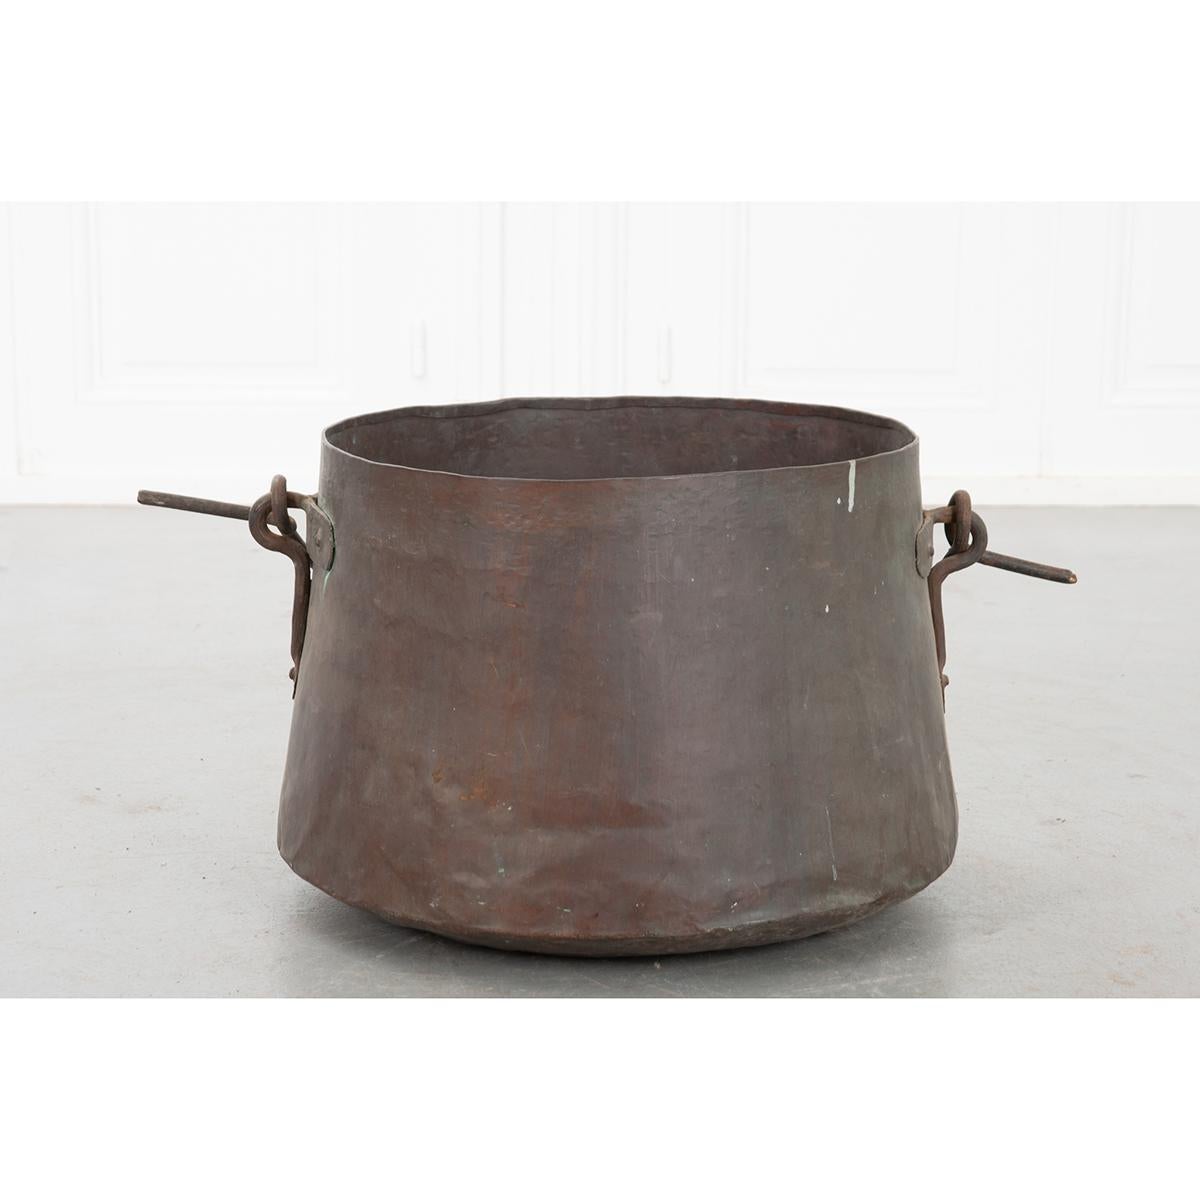 A sizable antique copper pot, equipped with a forged iron handle that can be used to suspend the vessel over a fire. The pot has a hammered exterior that gives the antique a styled finish. The copper has patinated wonderfully, with some verdigris